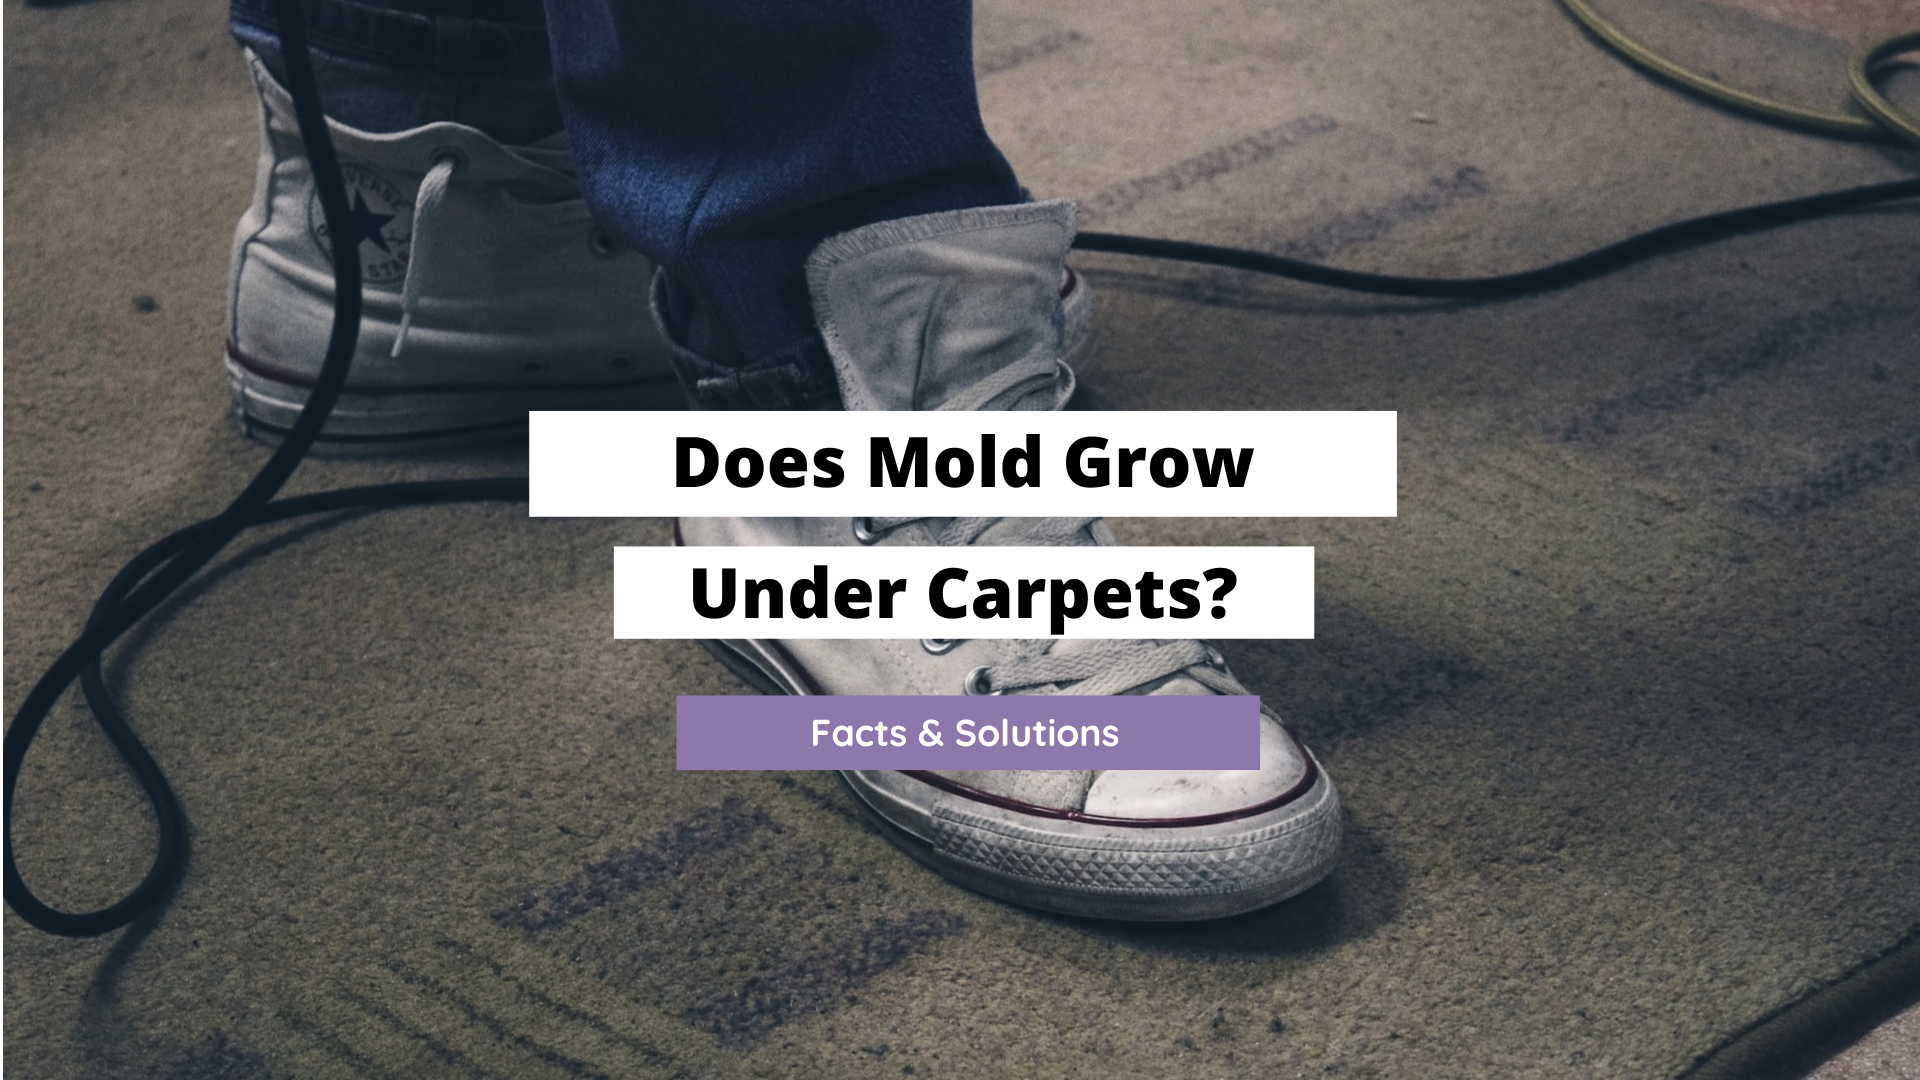 mold under carpets, does mold grow under carpets, mold grows under carpets, mold growing under carpet